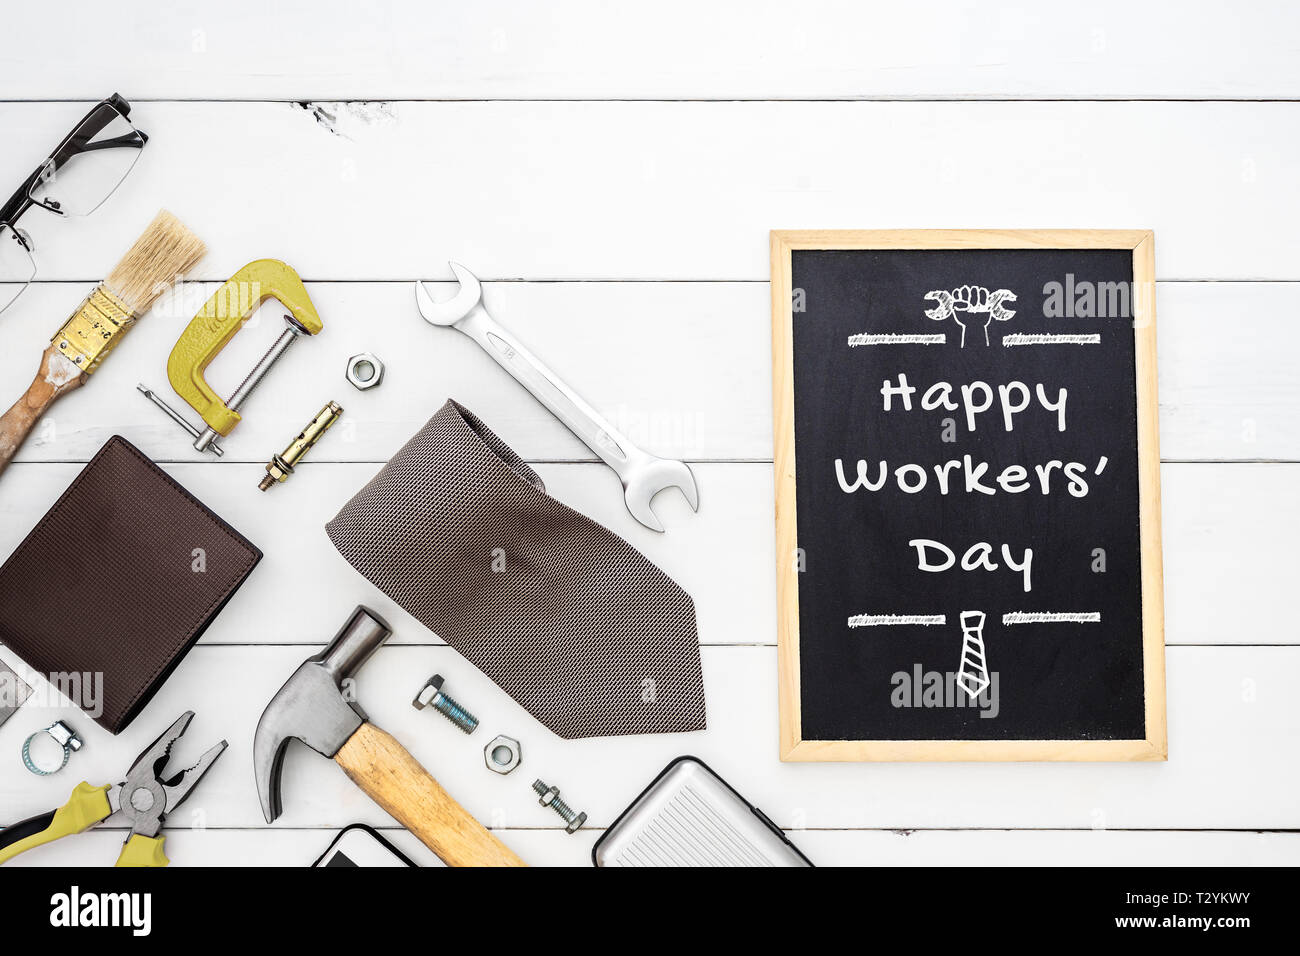 Happy Workers' Day background concept. Flat lay of construction blue collar handy tools and white collar's accessories over wooden background with bla Stock Photo